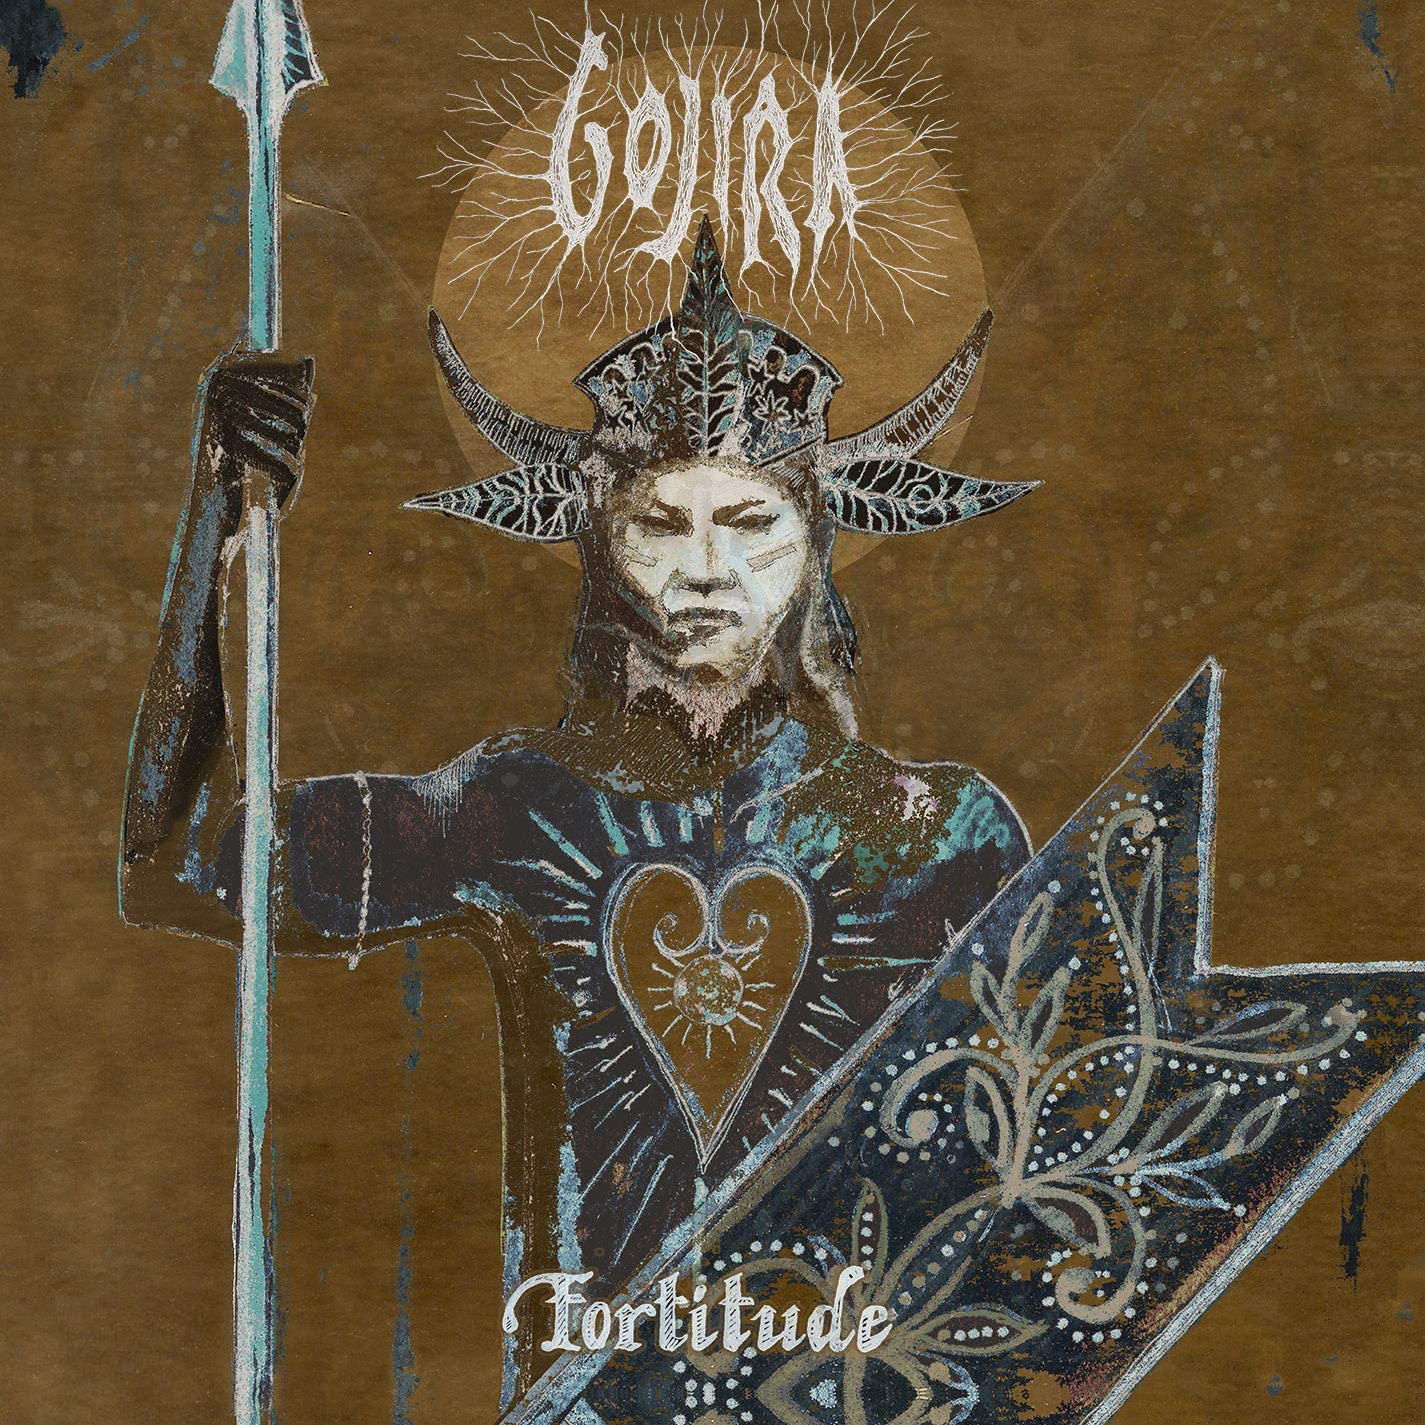 FORTITUDE stands is Gojira's first album in five years and the follow-up to 2016's Grammy nominated LP MAGMA.